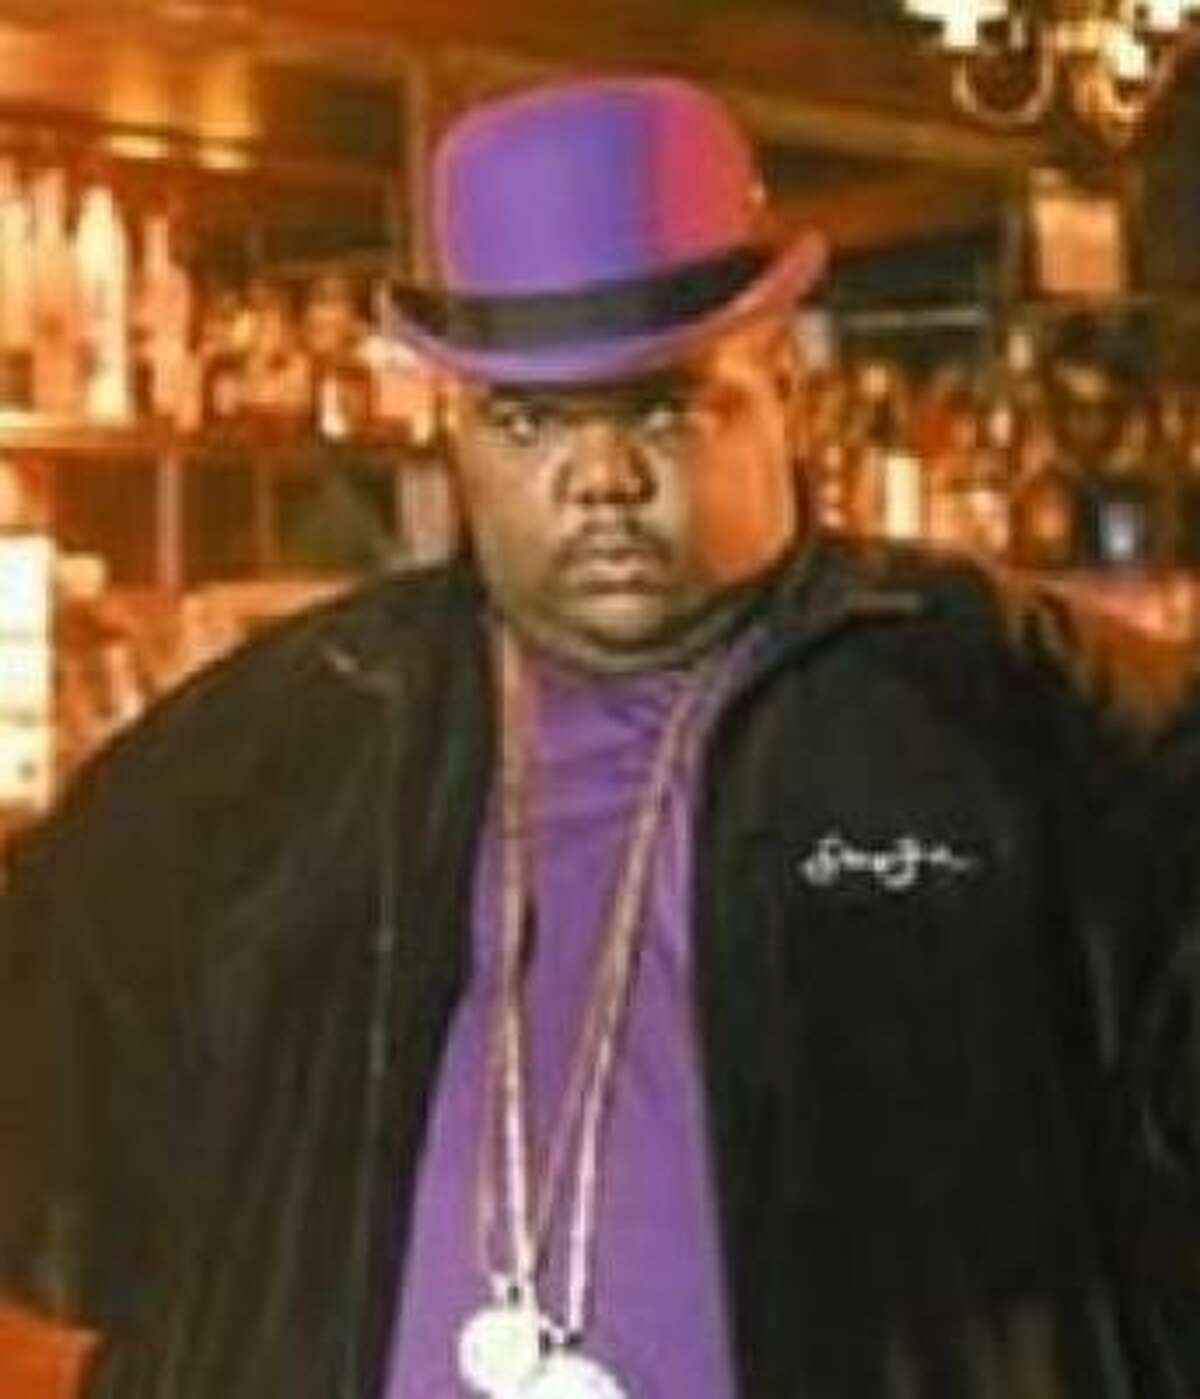 Houston rapper Big Moe died in October after having a heart attack that left him in a coma.